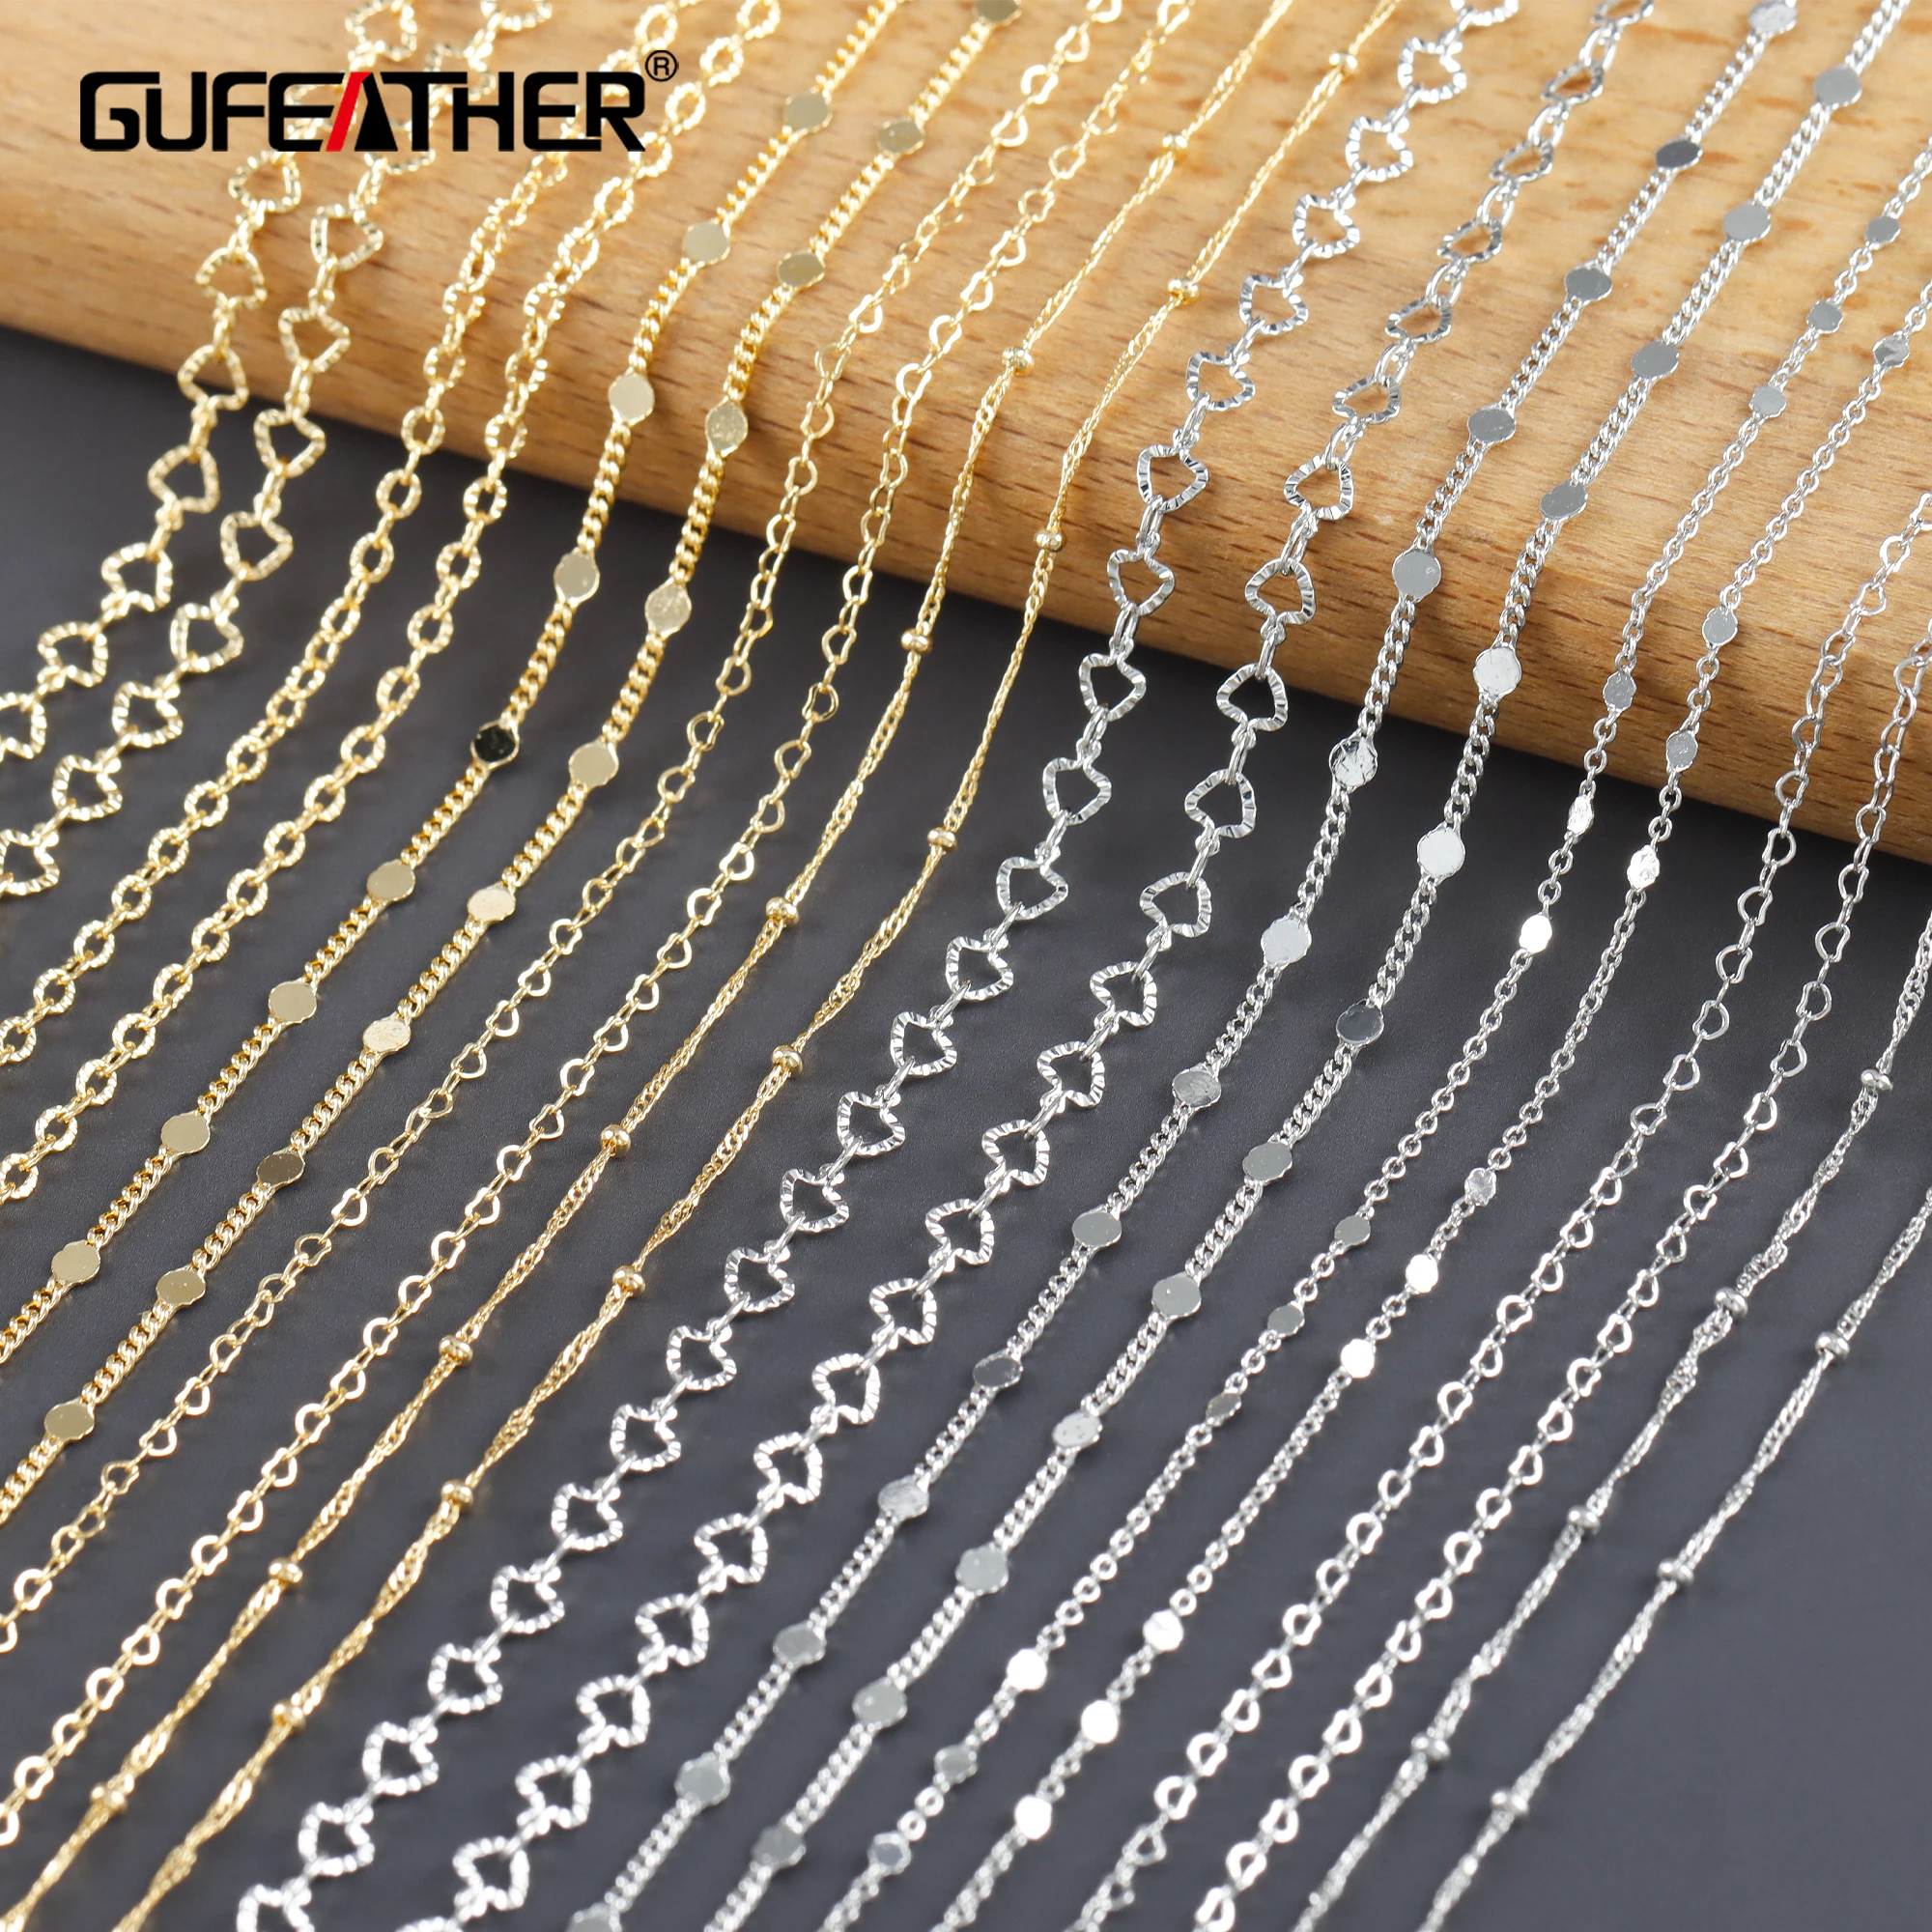 GUFEATHER C276,thin chain,18k gold rhodium plated,copper,pass REACH,nickel free,jewelry making,diy bracelet necklace,1m/lot